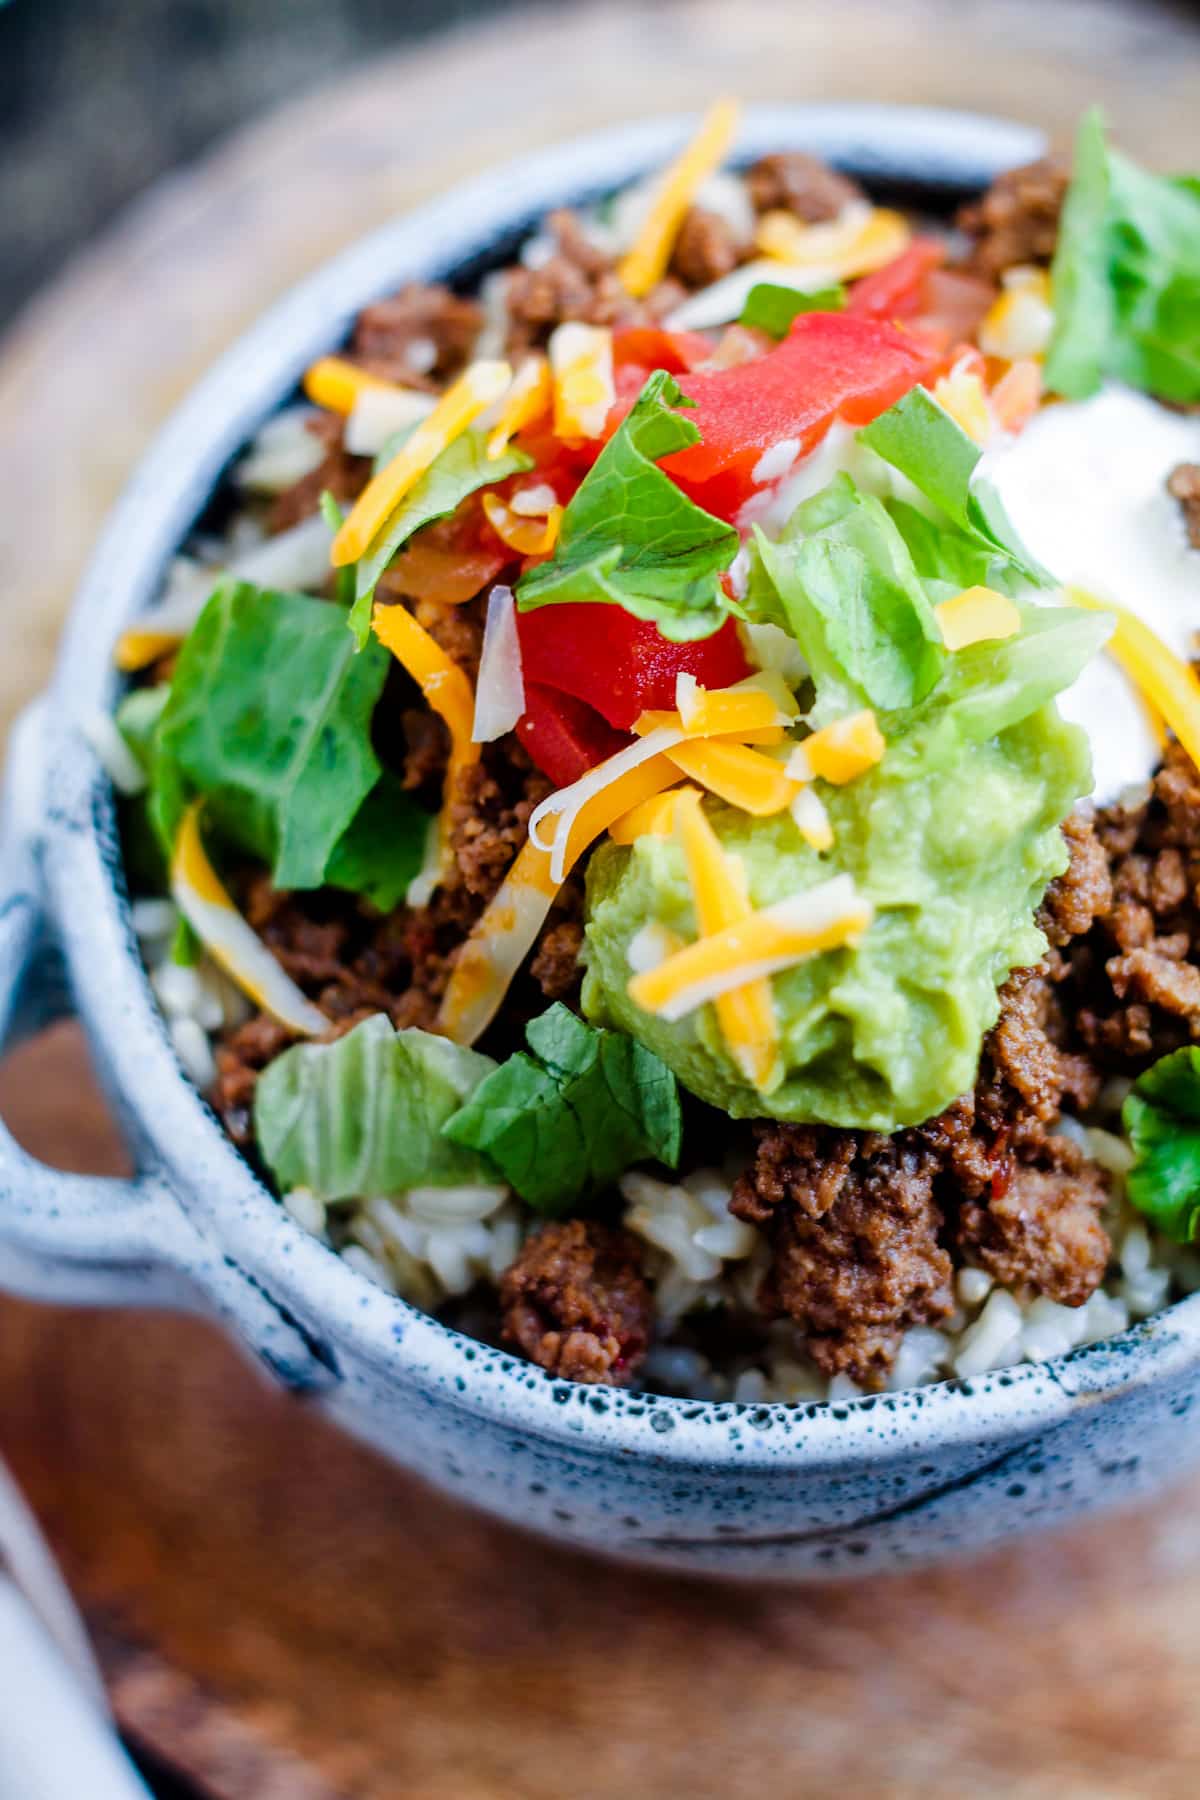 A taco rice bowl topped with salsa, cheese, sour cream and guacamole.